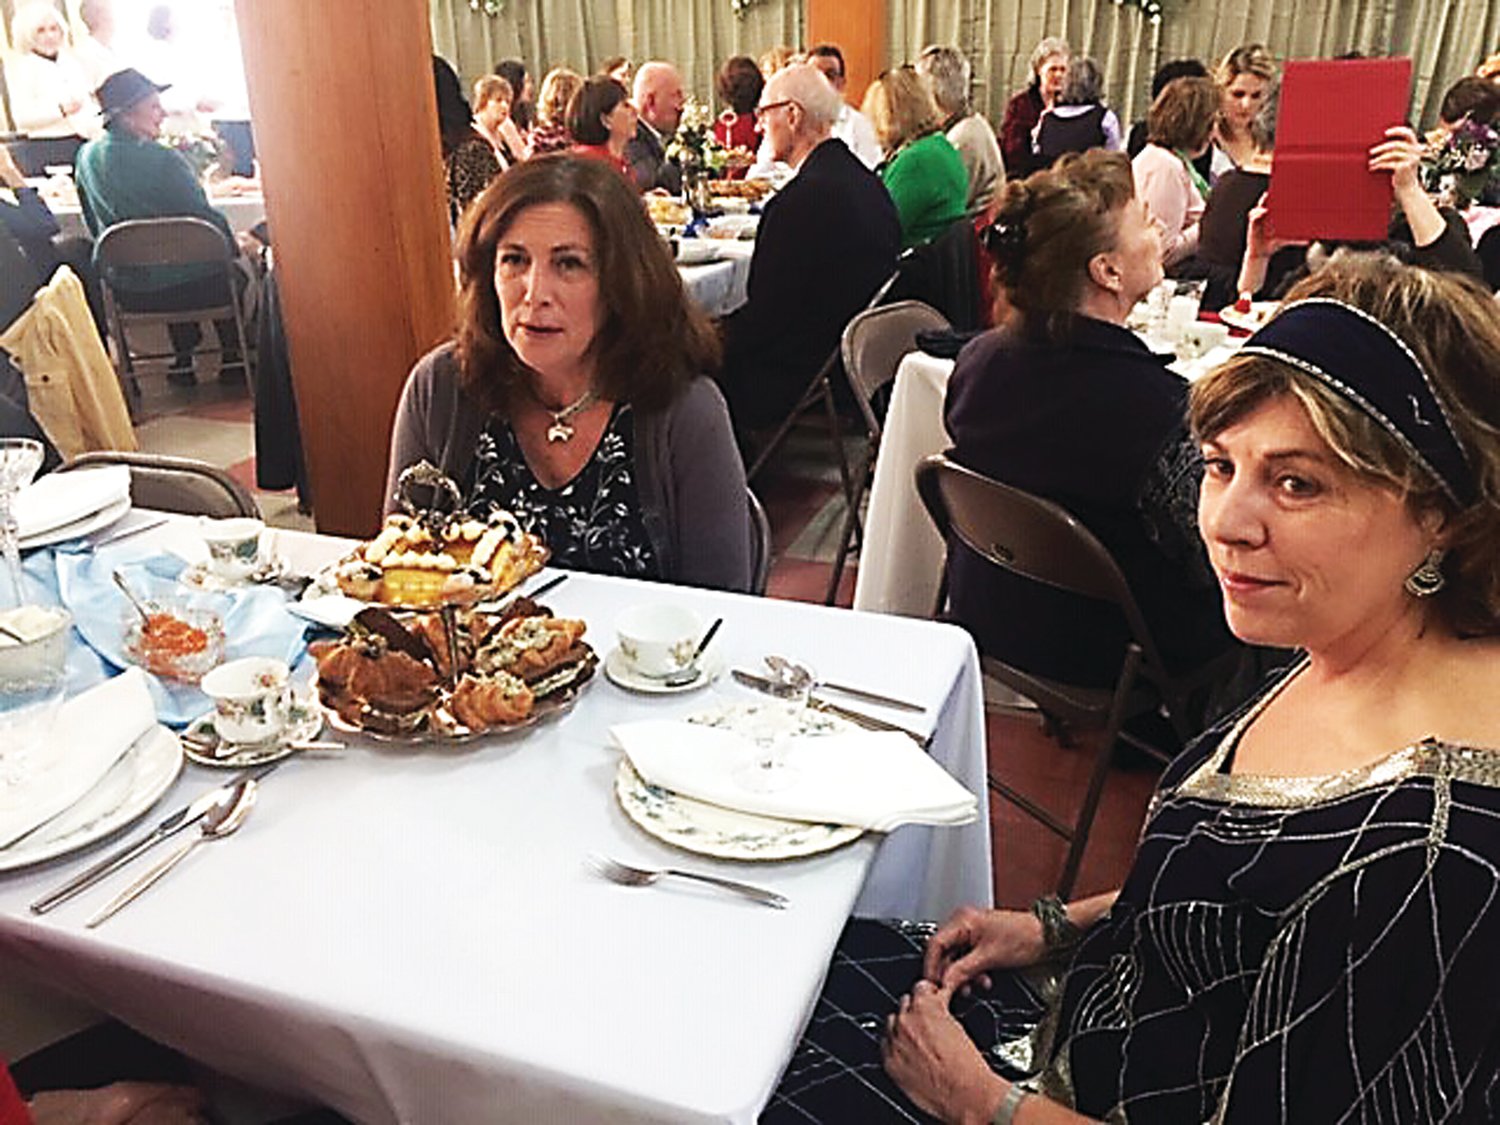 About 60 guests attended the Full British High Tea staged in the community room at Riegelsville Borough Hall. Photograph by Kathryn Finegan Clark.